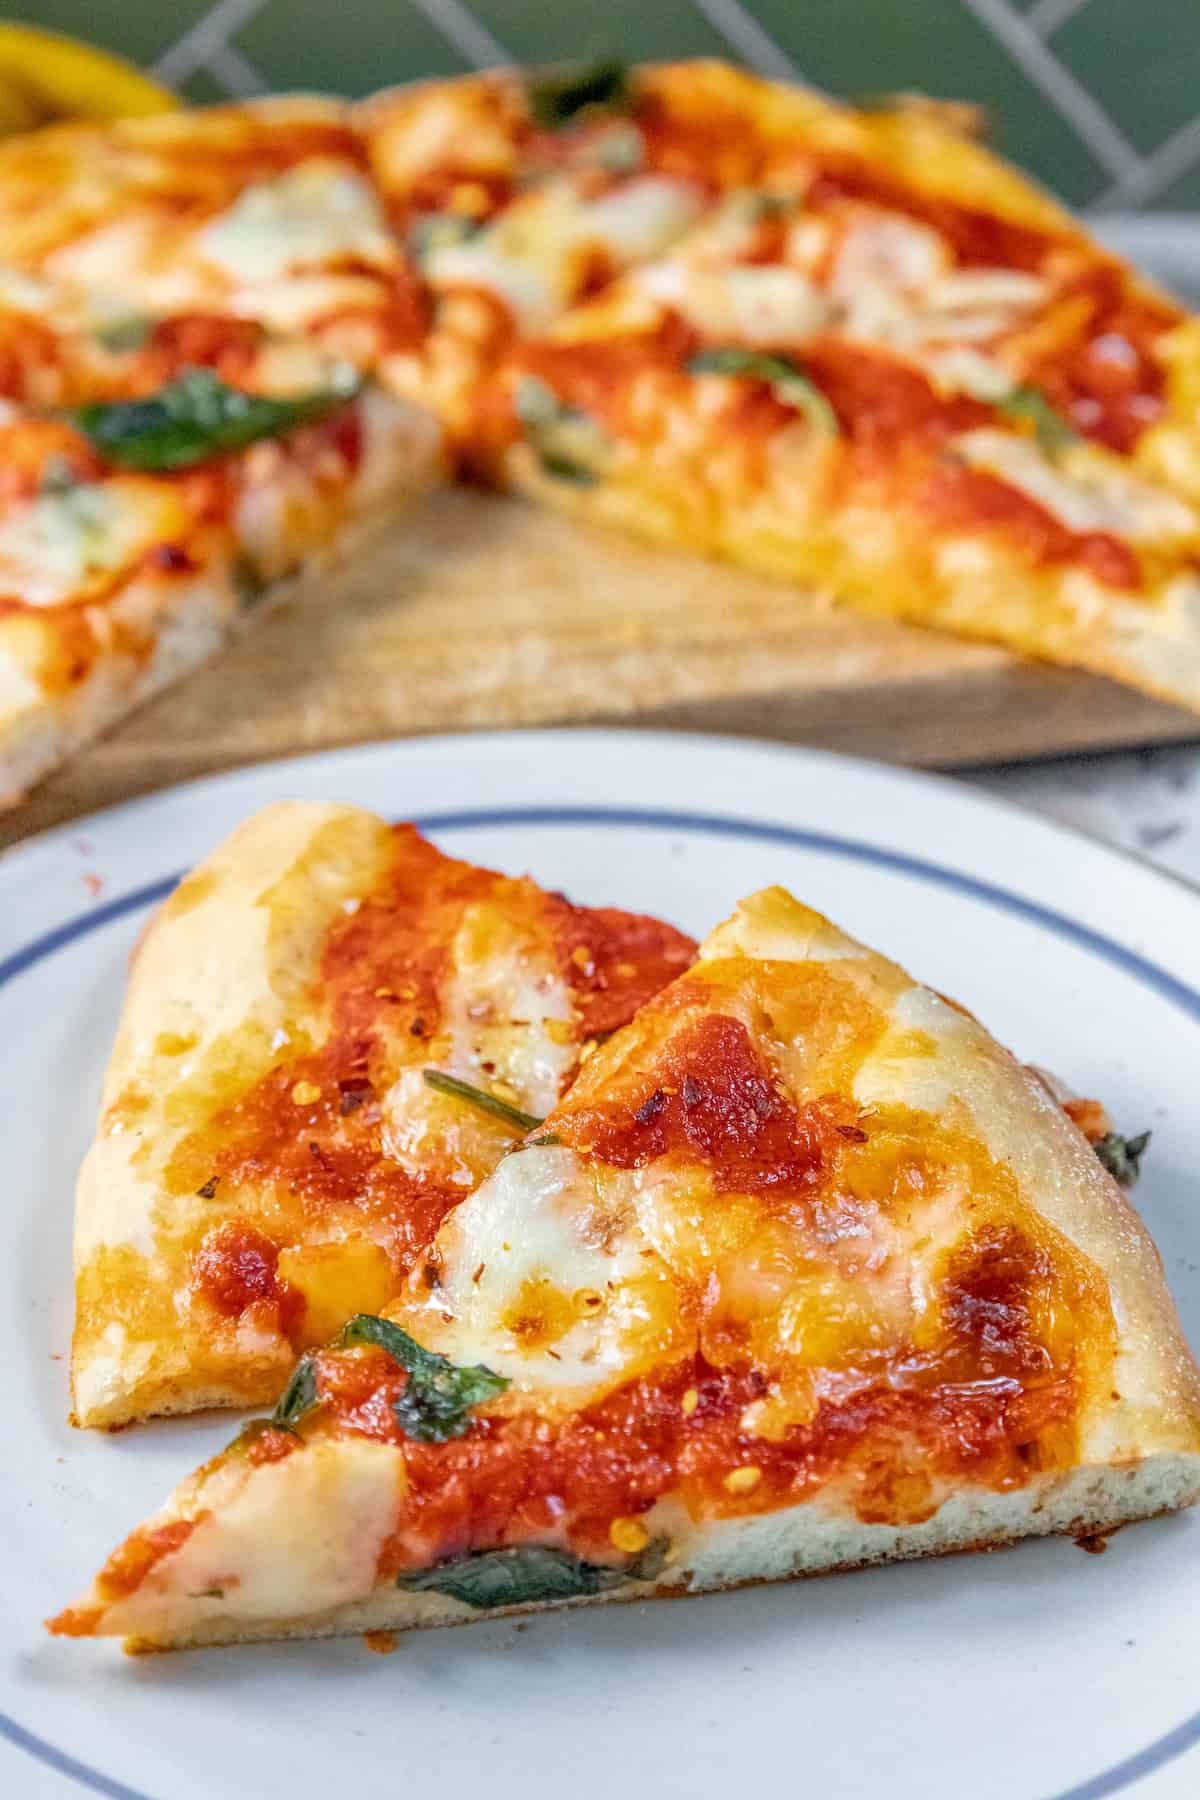 A classic margherita pizza slice on a plate.